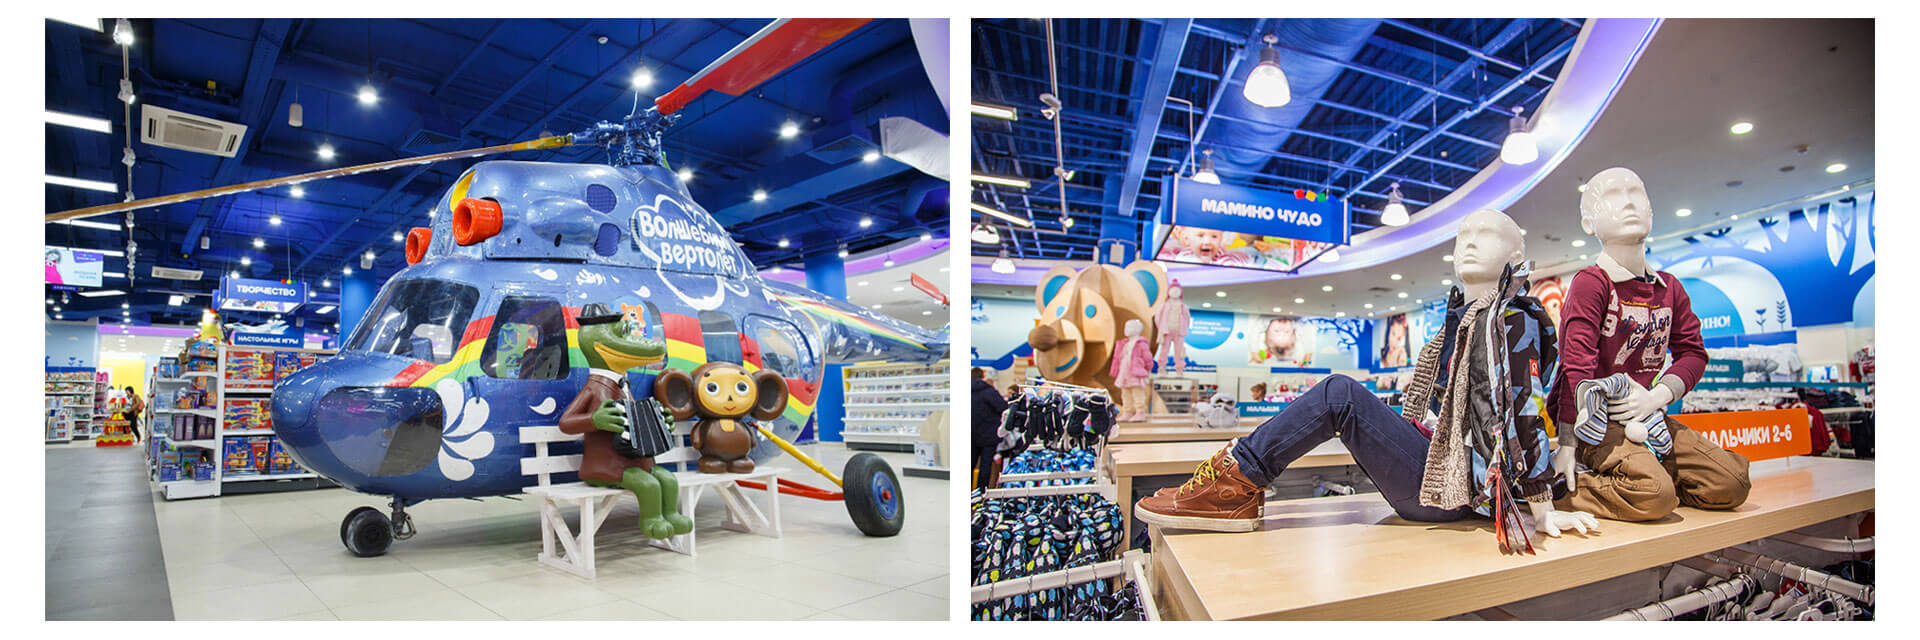 Detskiy Mir Russia best internal department branding, store interior design, concepts for toys and children's fashion gena and cheburashka helicopter